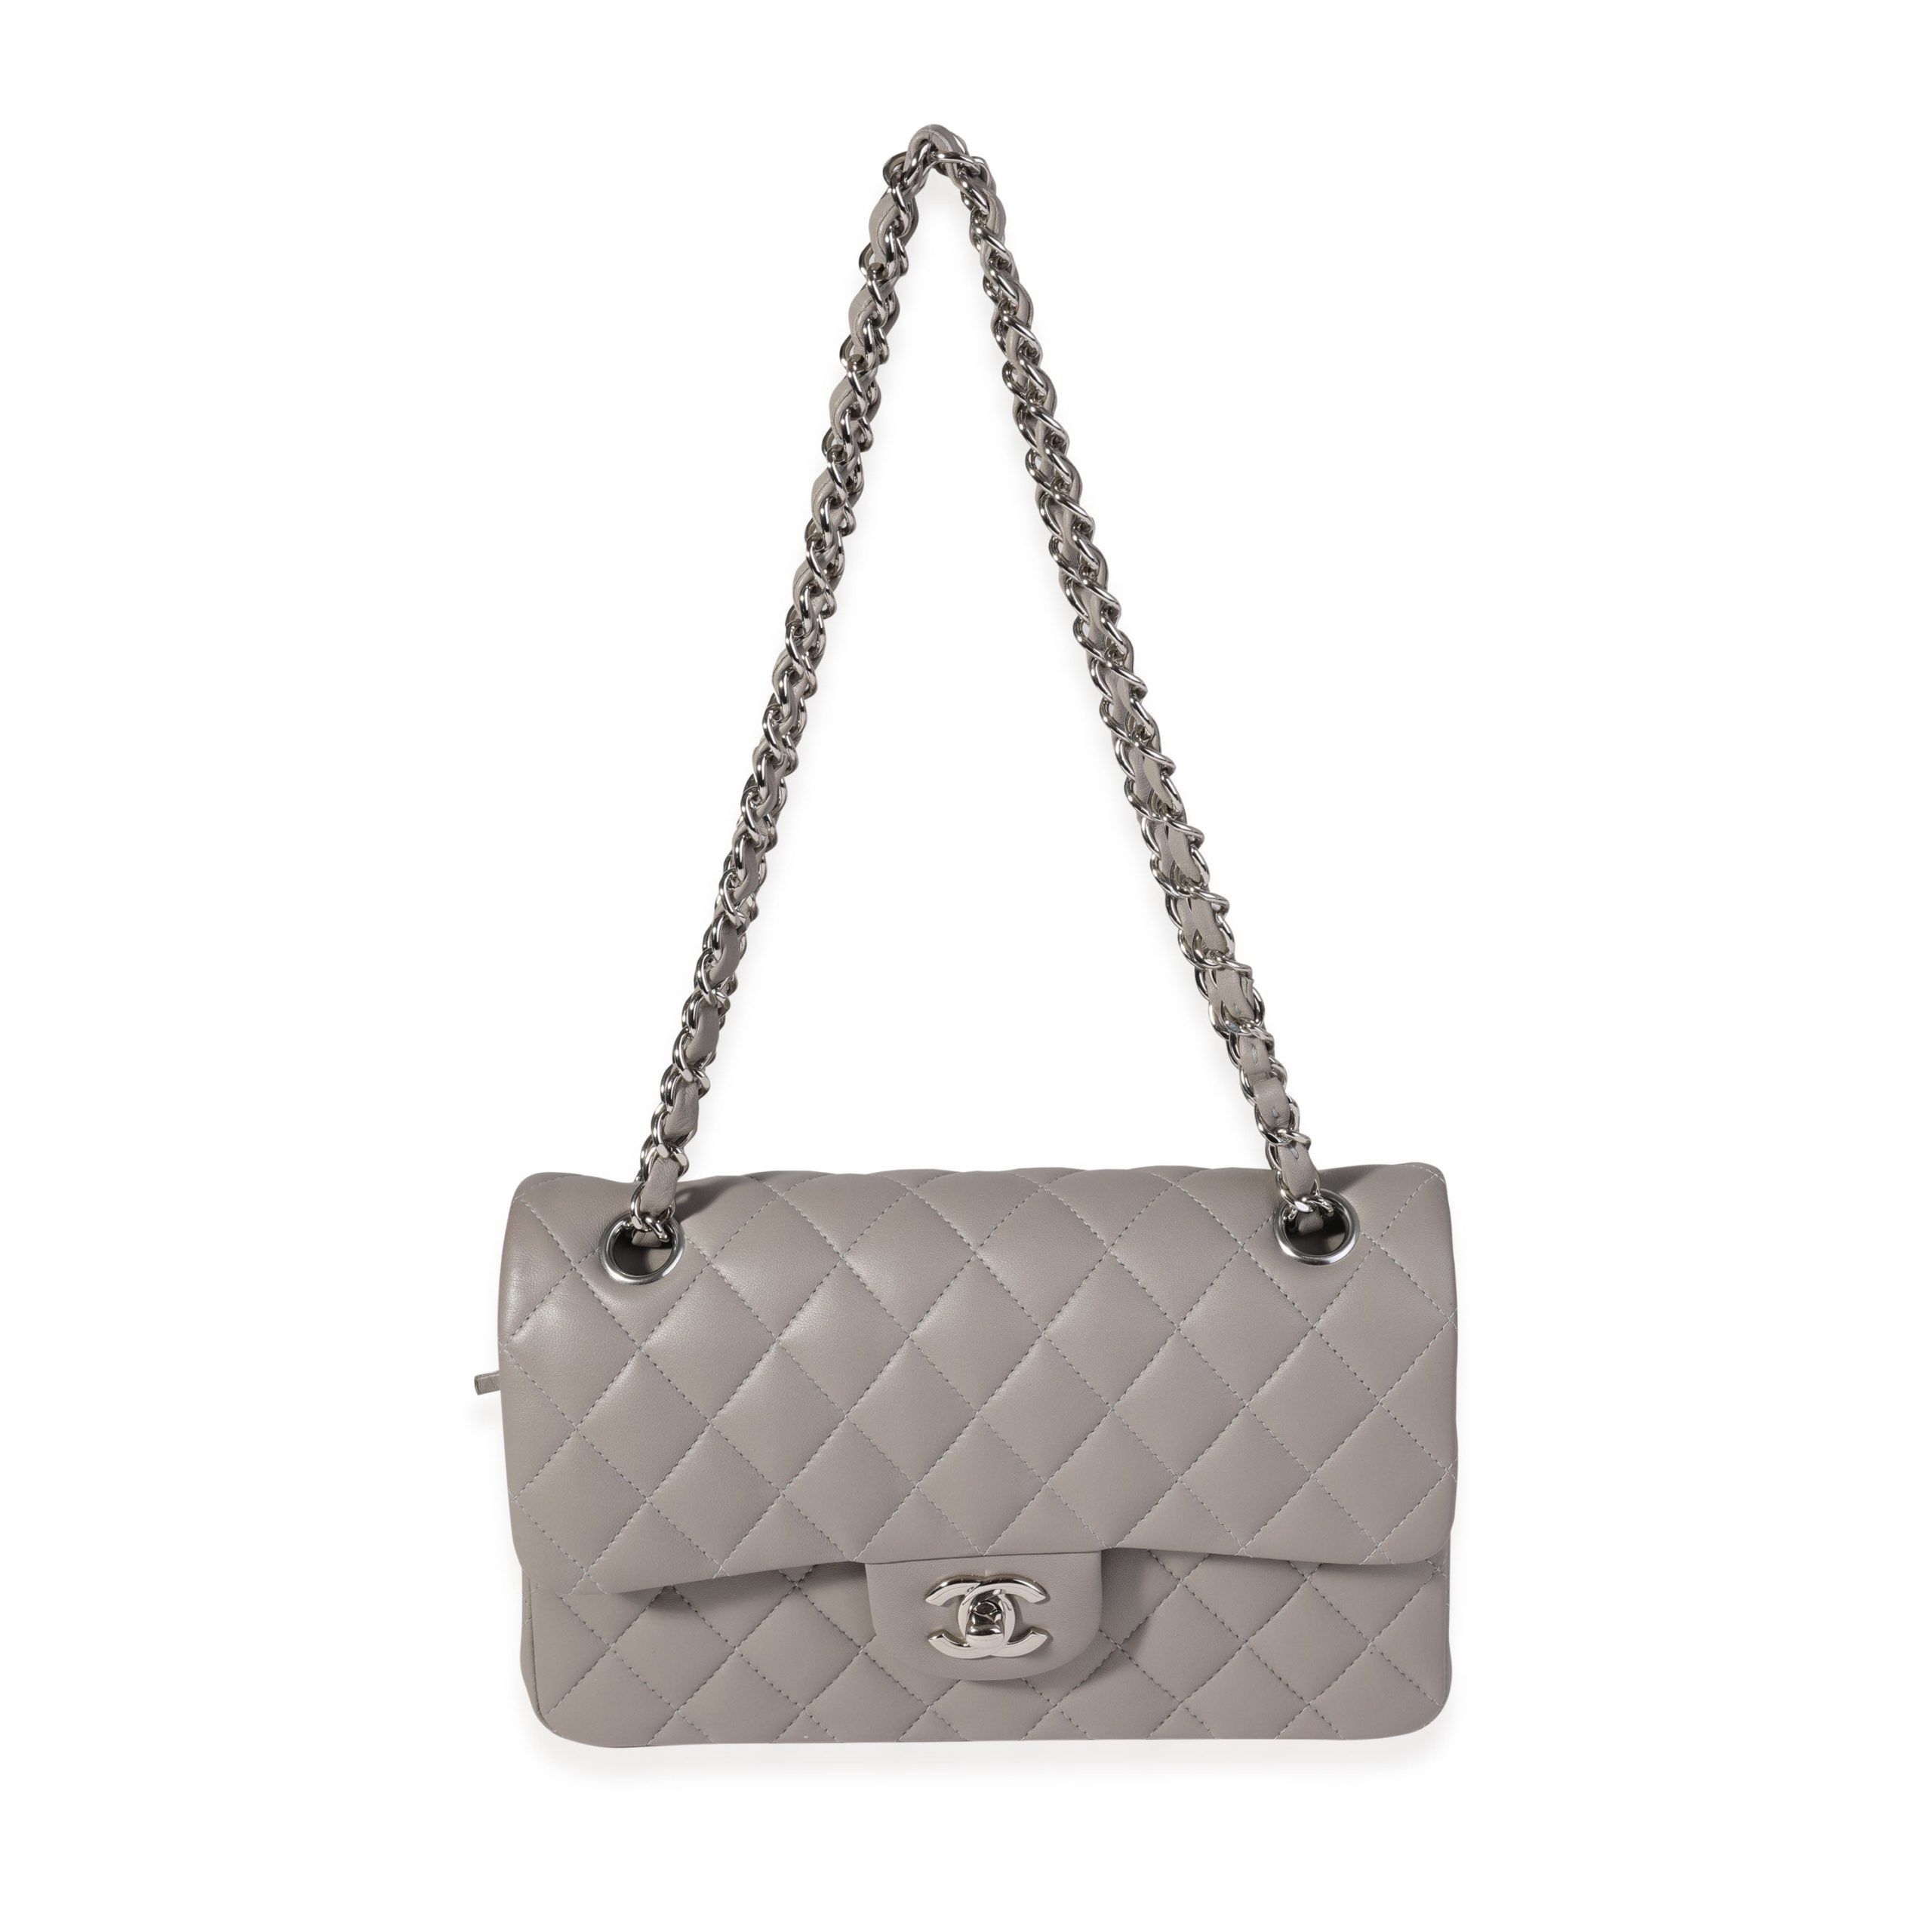 Chanel Chanel Grey Quilted Lambskin Small Classic Double Flap Bag Size ONE SIZE - 4 Thumbnail